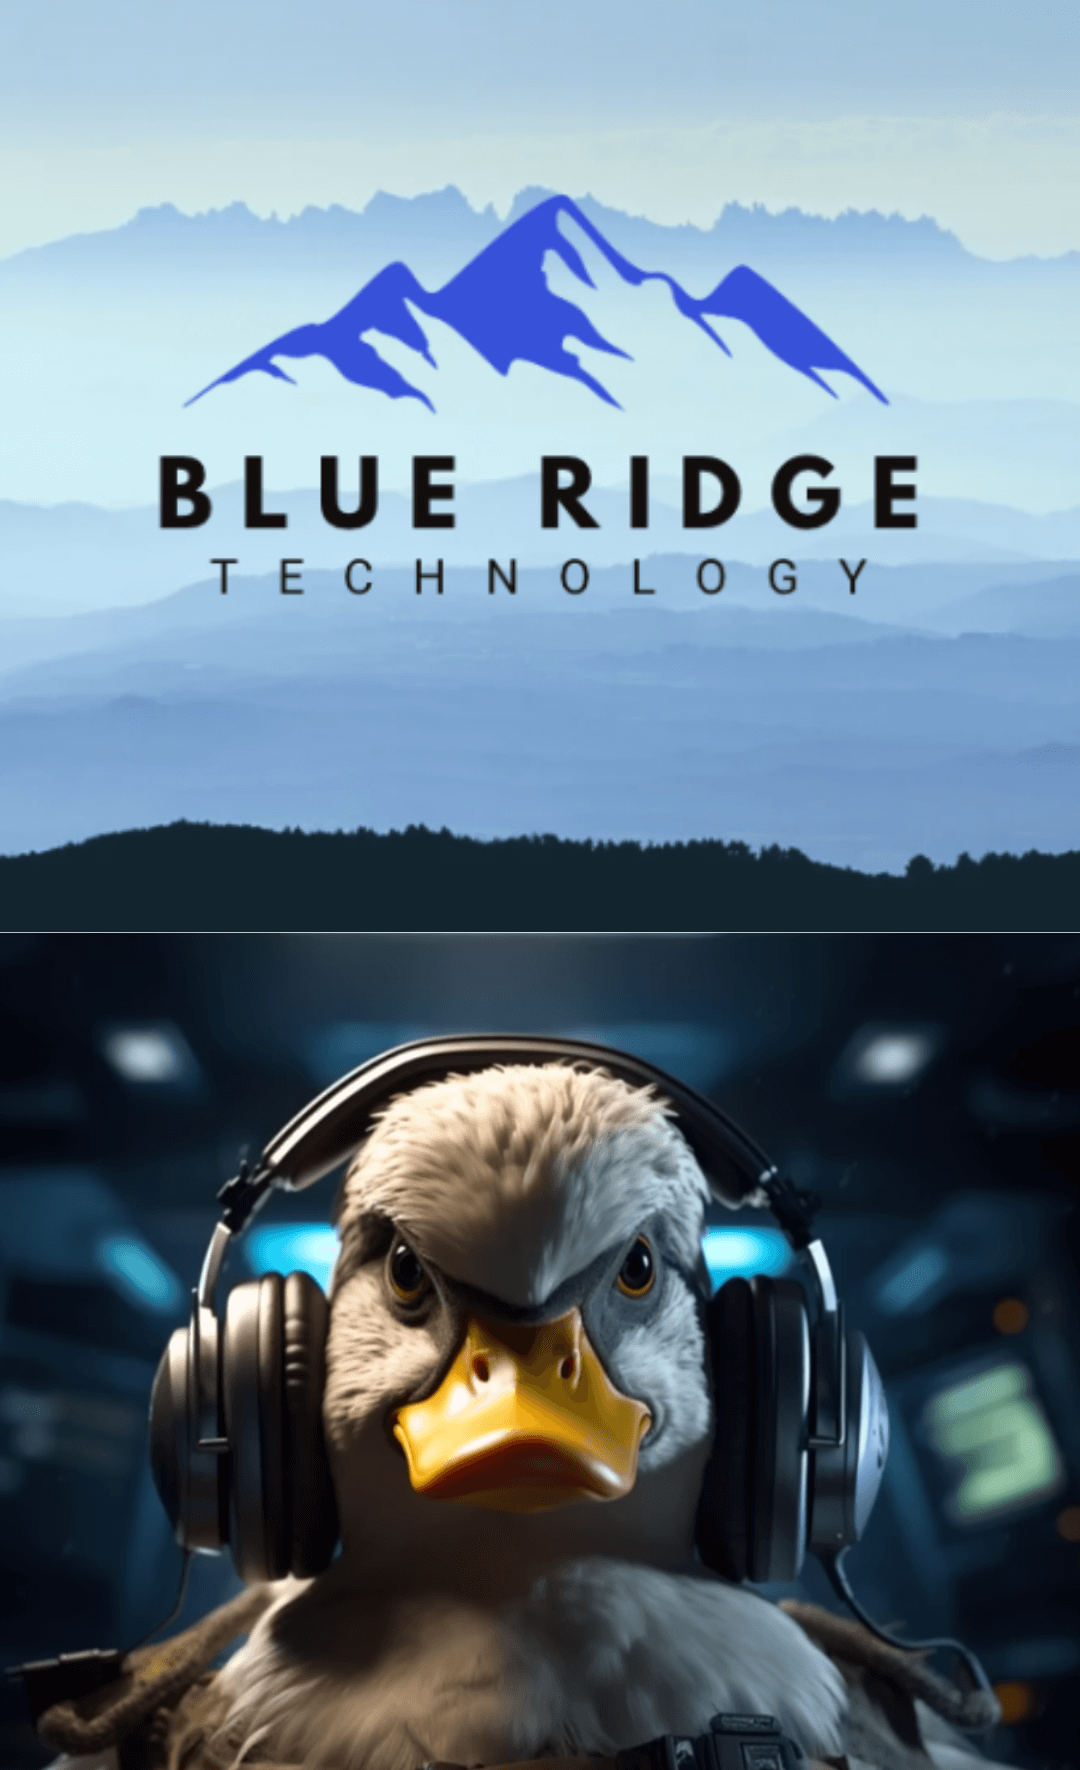 SSL Duck and ProSolutions are members of the Blue Ridge Technology Family of Companies